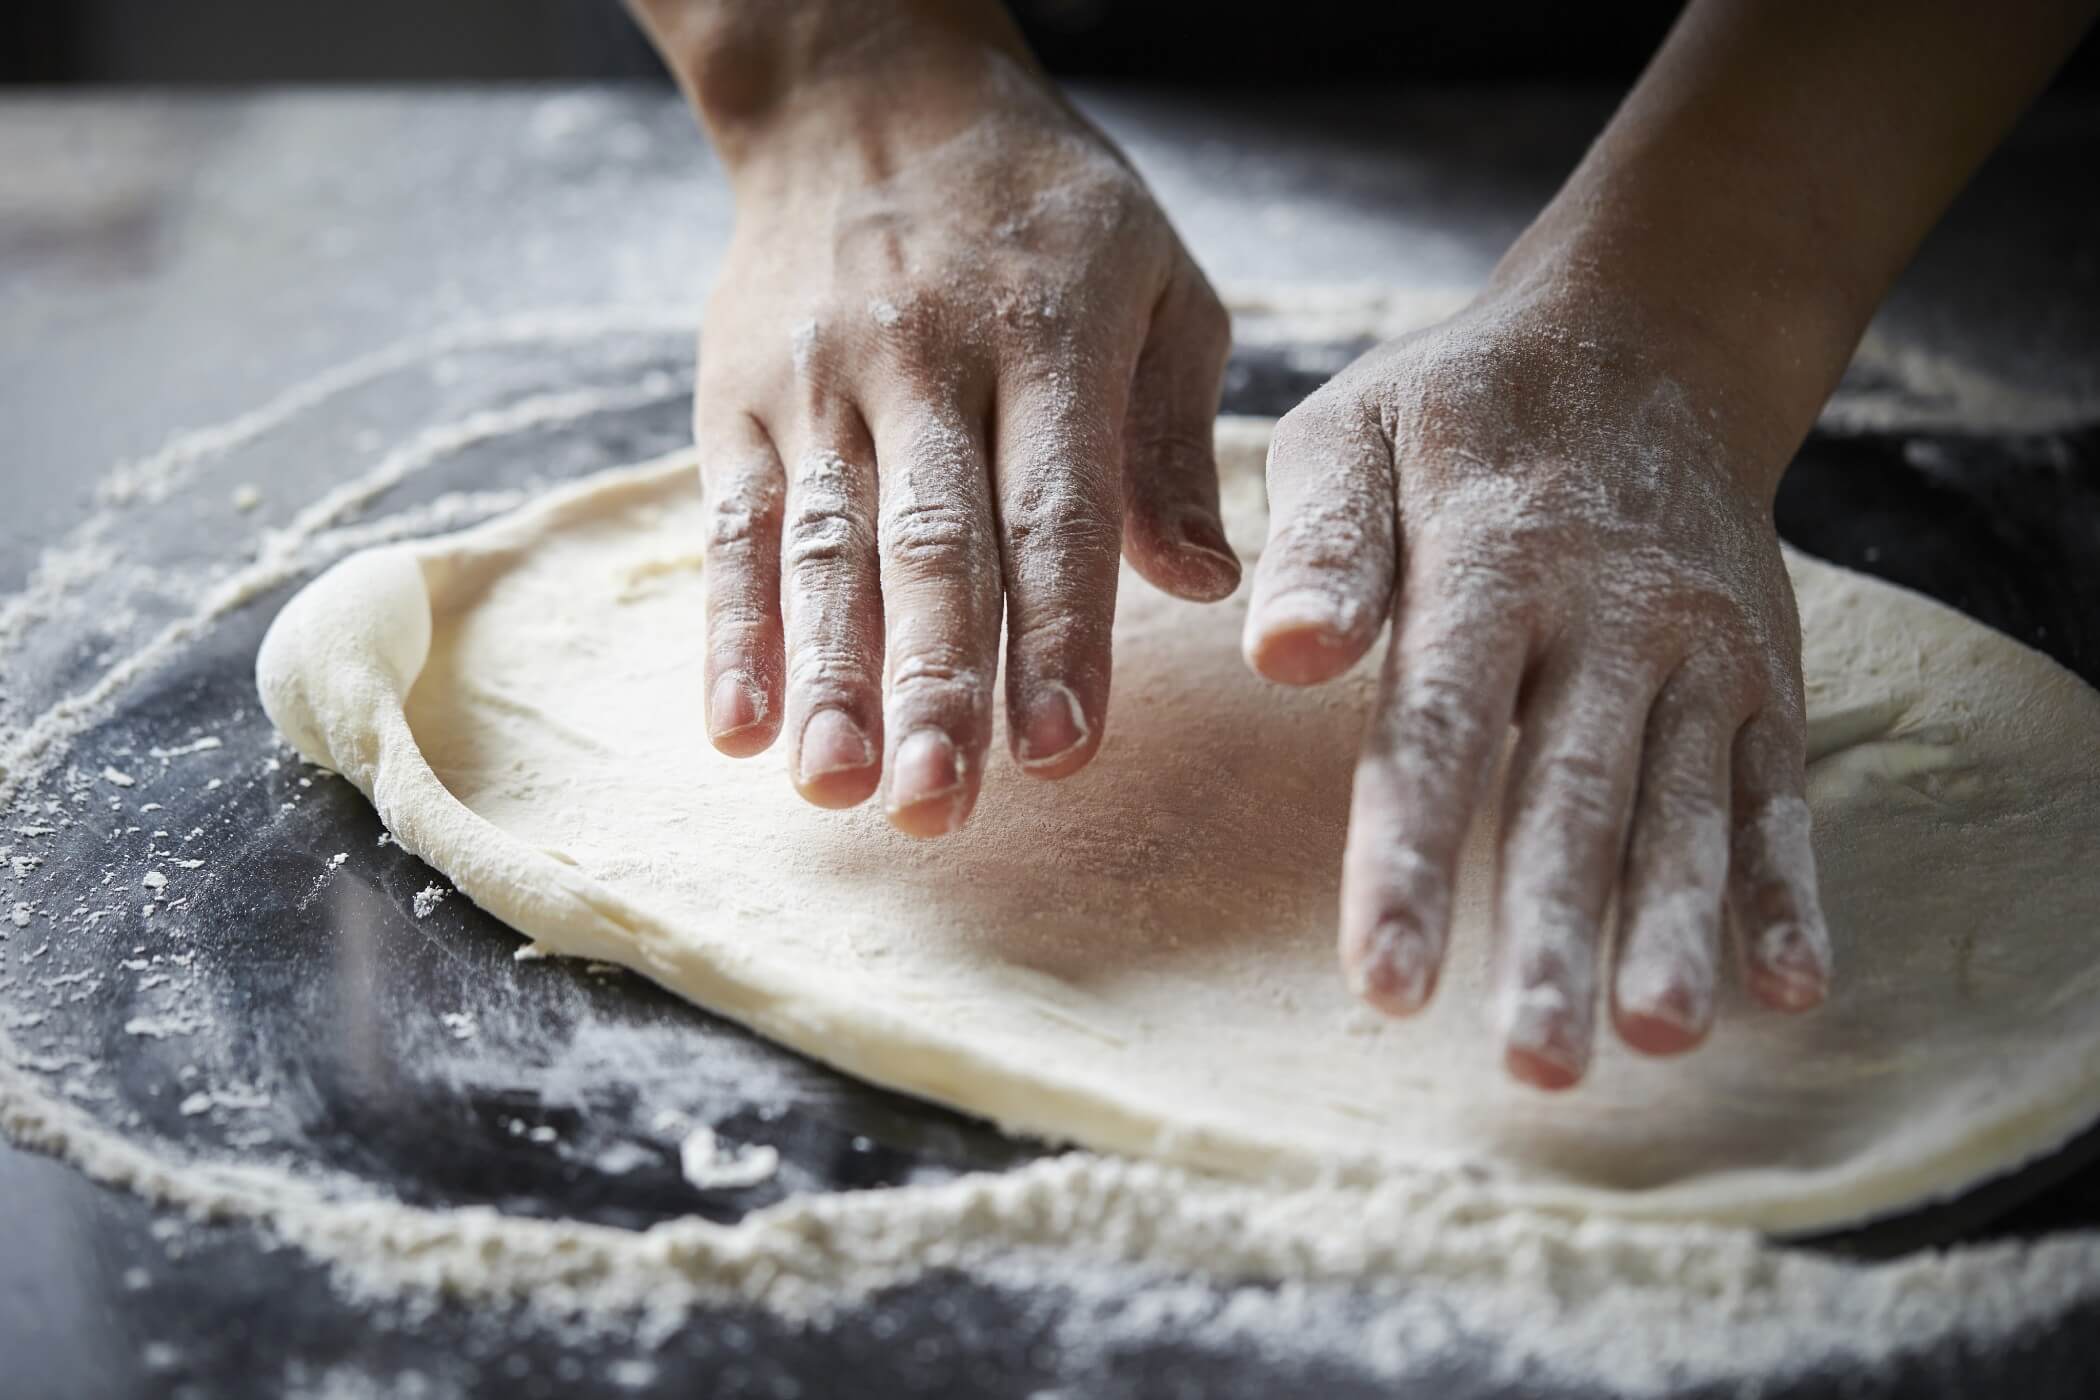 hand shaping dough into a pizza